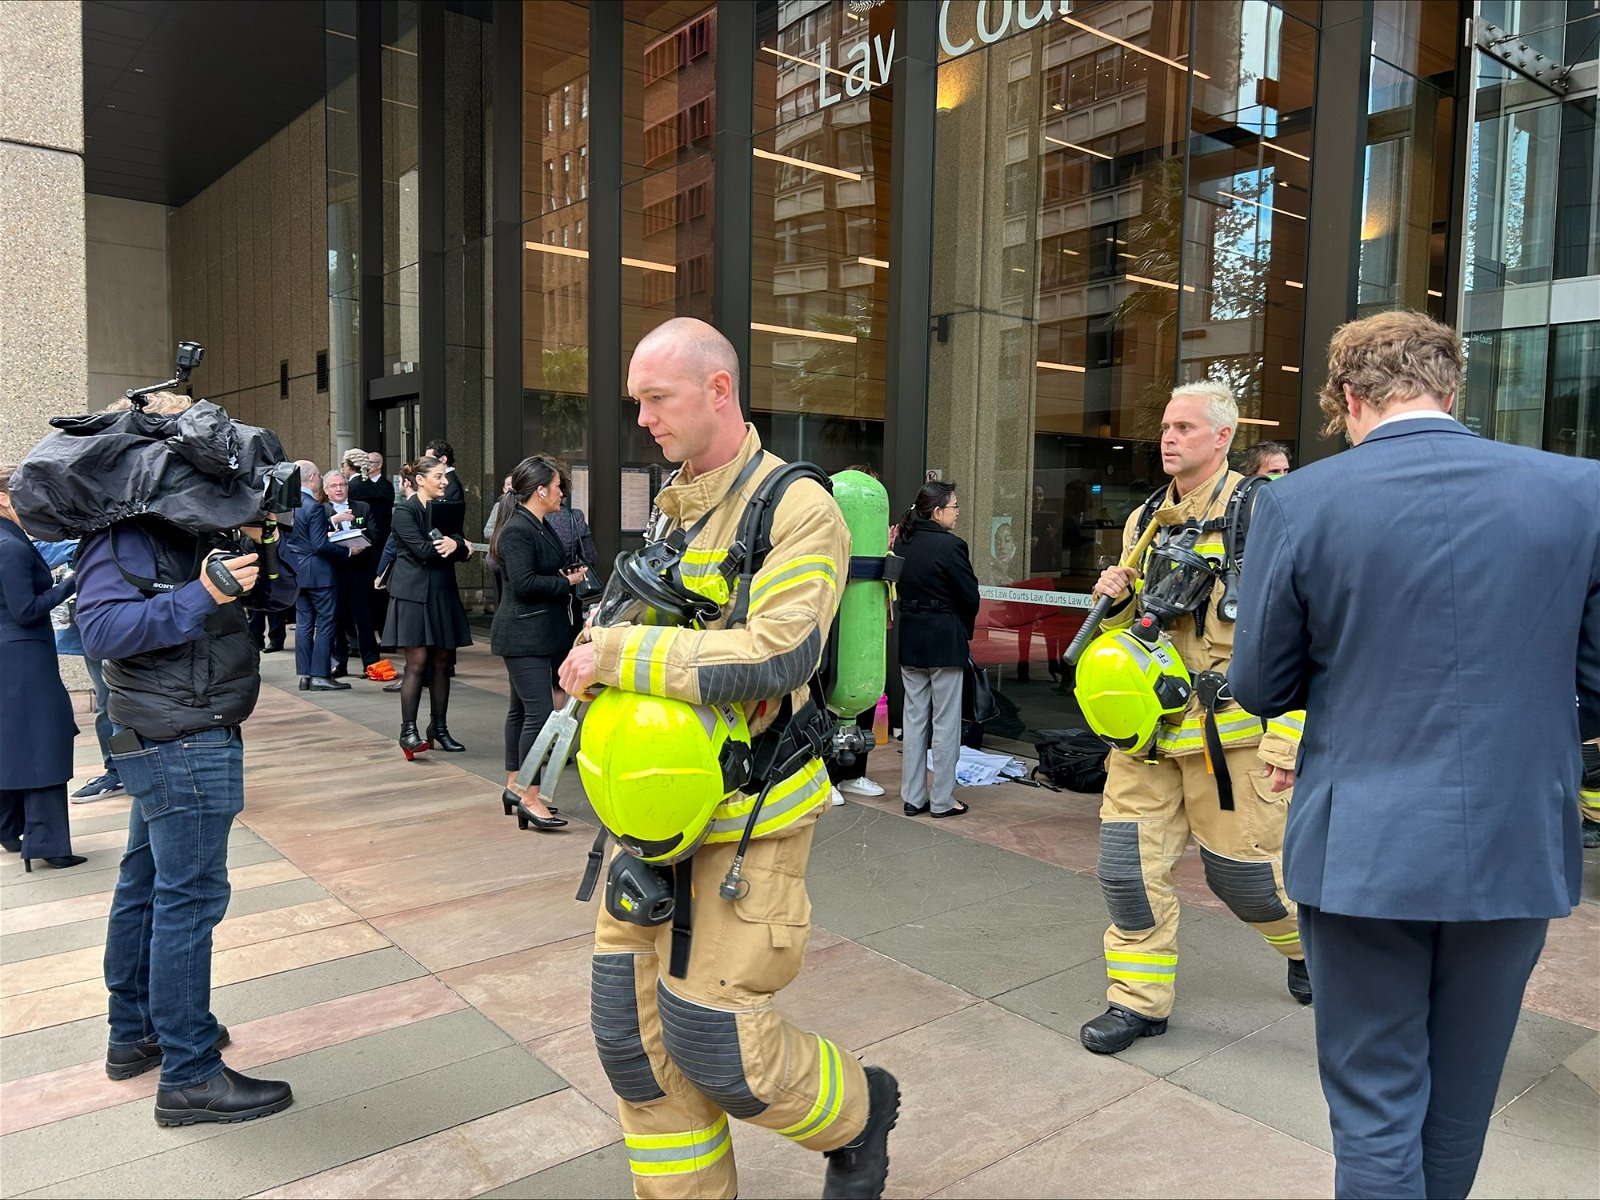 Firemen in bright suits leave court, people milling around